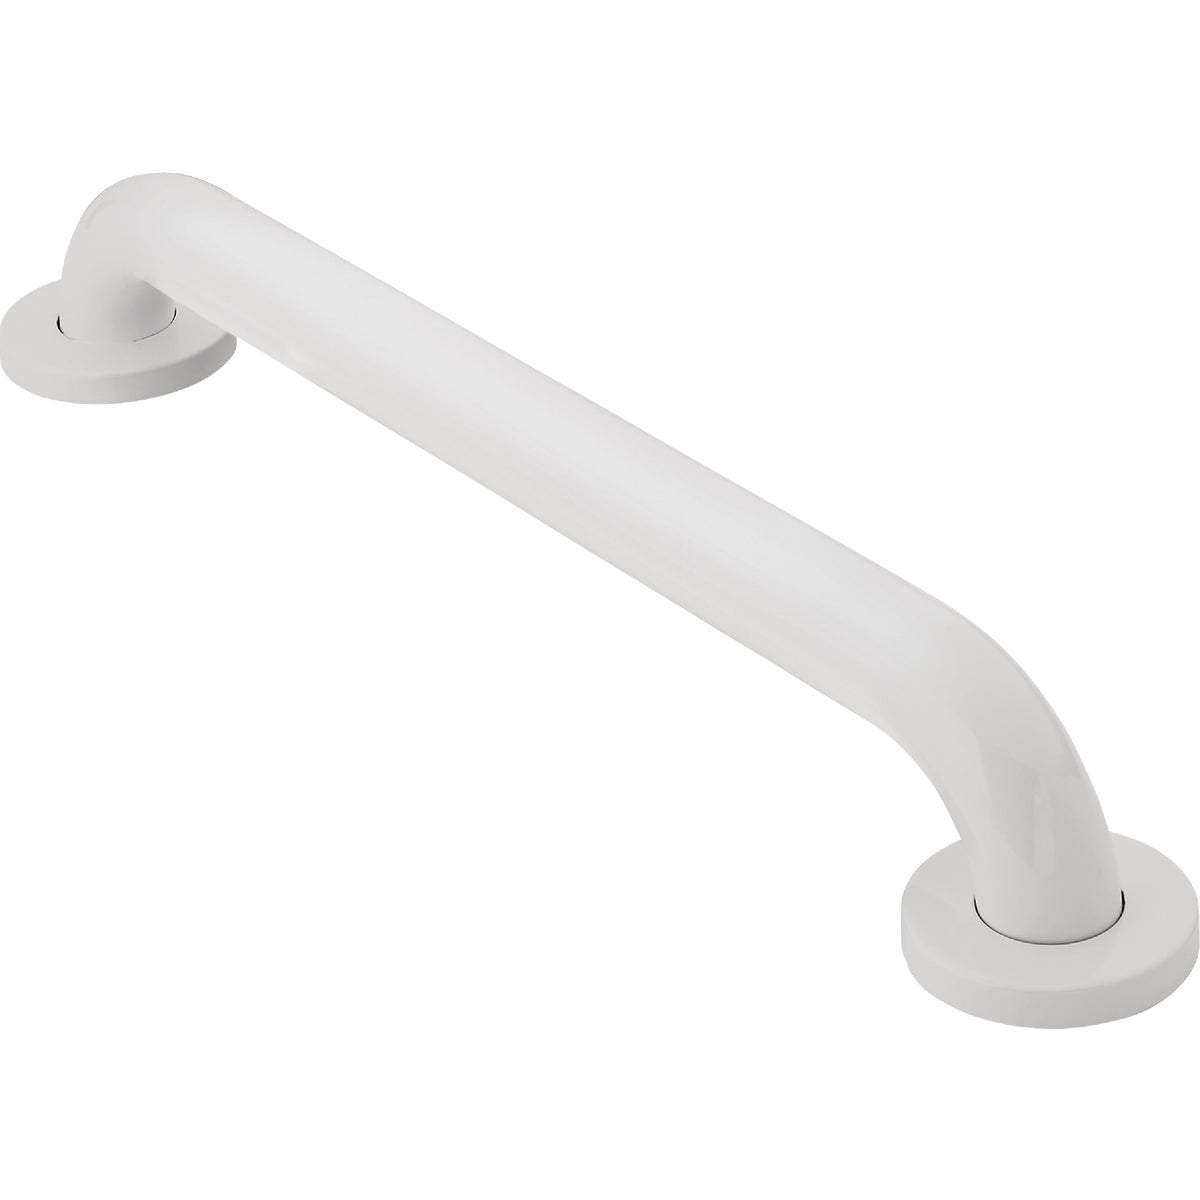 Moen Home Care 18 In. x 1-1/2 In. Concealed Screw Glacier Grab Bar, White